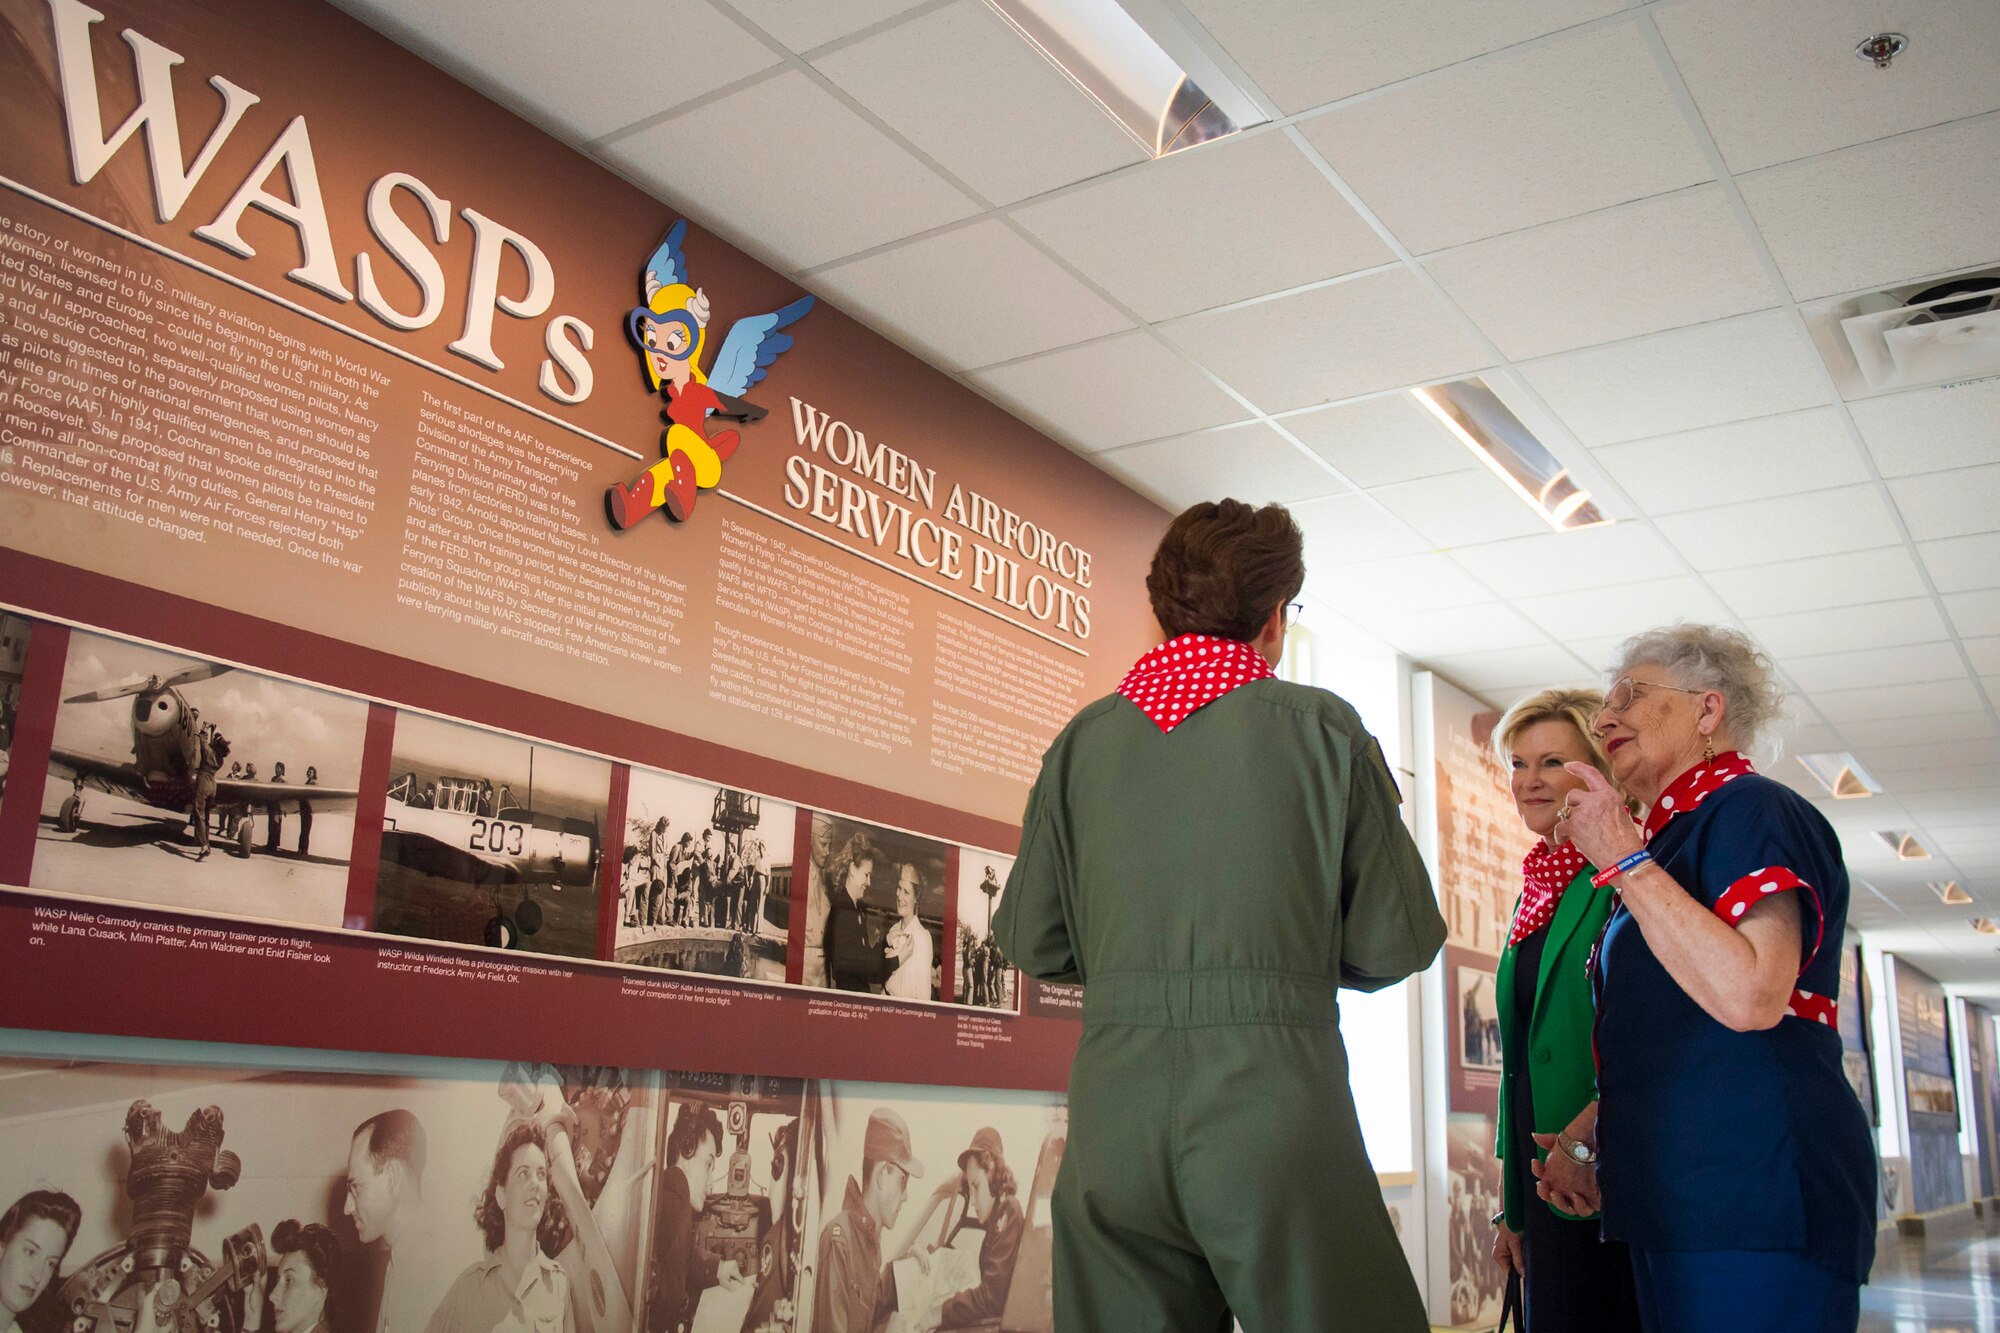 Headquarters Air Force Director of Staff Lt. Gen. Jacqueline D. Van Ovost, Headquarters Air Force director of Staff, gives Mae Krier, an original Rosie the Riveter, a tour of the Pentagon in Arlington, Va., during her first-ever visit March 20, 2019. Krier was accompanied by Dawn Goldfein, the spouse of Air Force Chief of Staff Gen. David L. Goldfein. (U.S. Air Force photo by Adrian Cadiz)